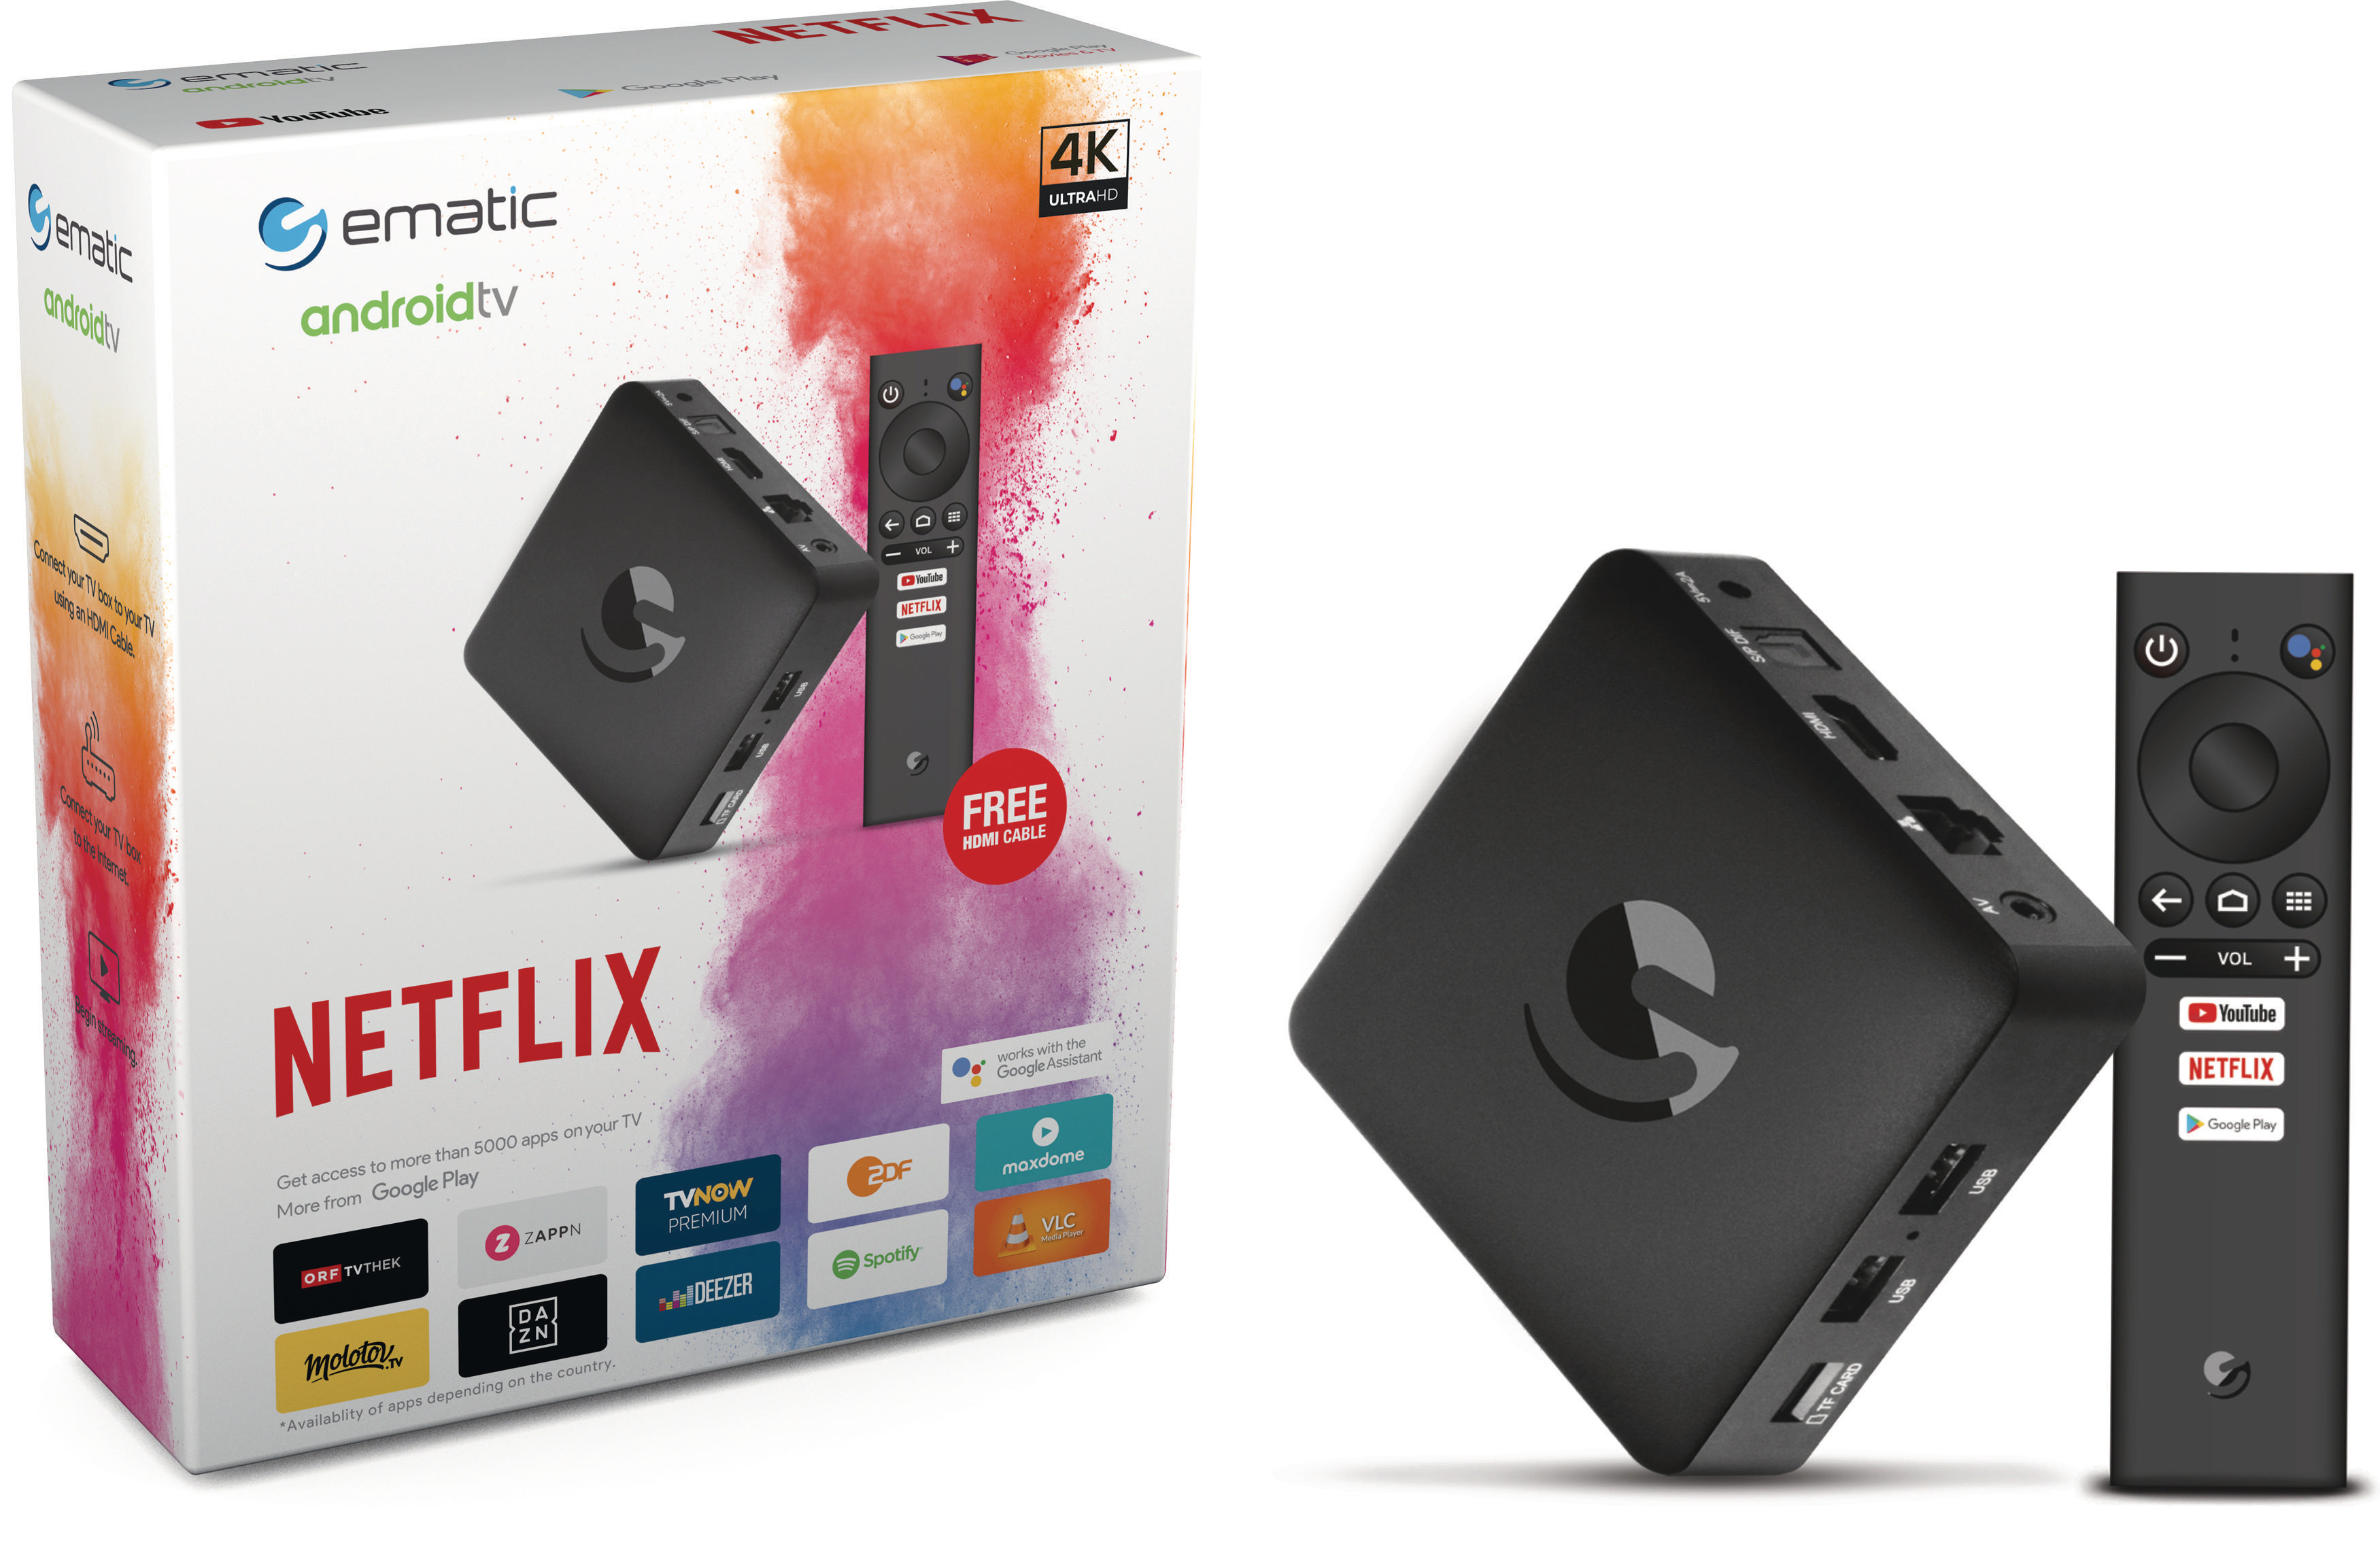 EMATIC SRT202 4K Box Streaming Android